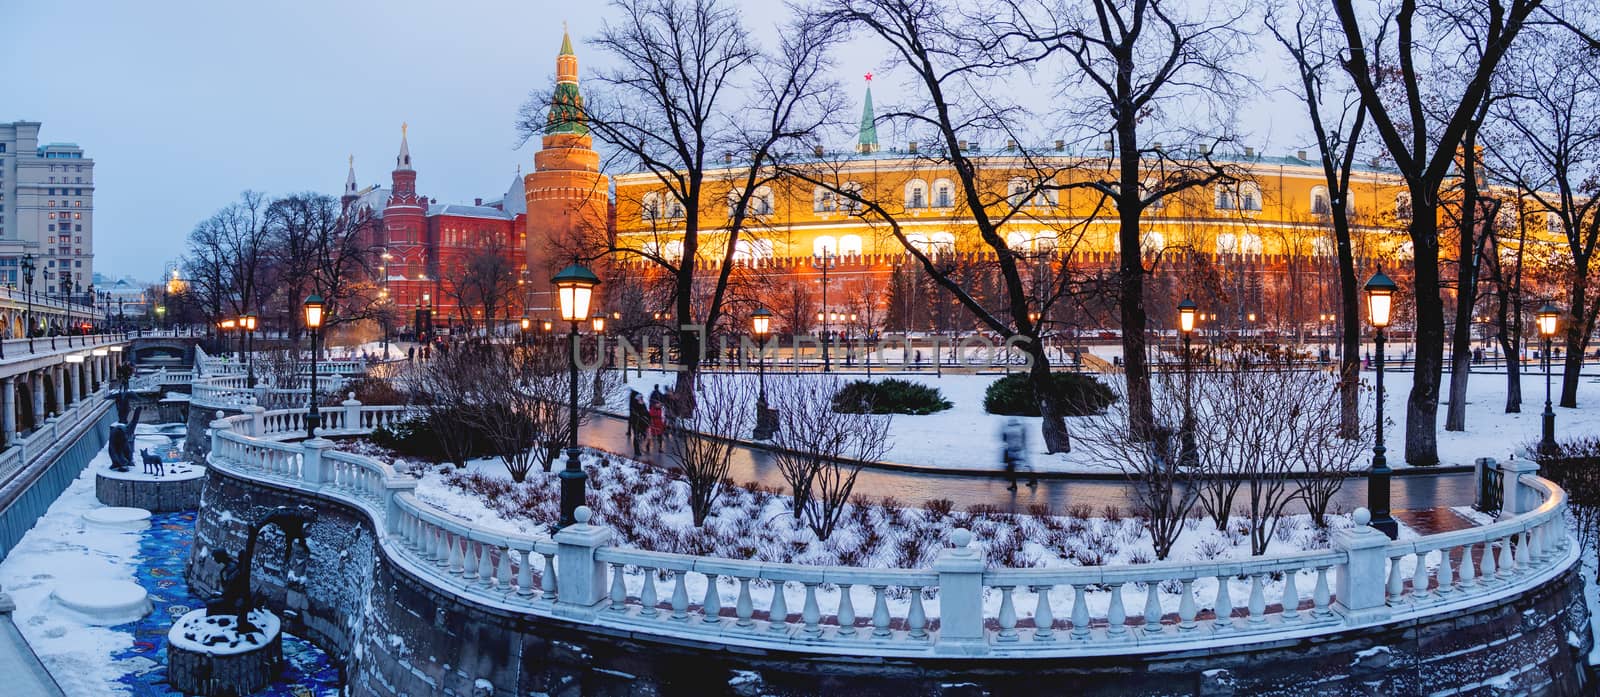 Panorama view on Kremlin and Alexander Gardens at winter evening. Moscow, Russia. by aksenovko